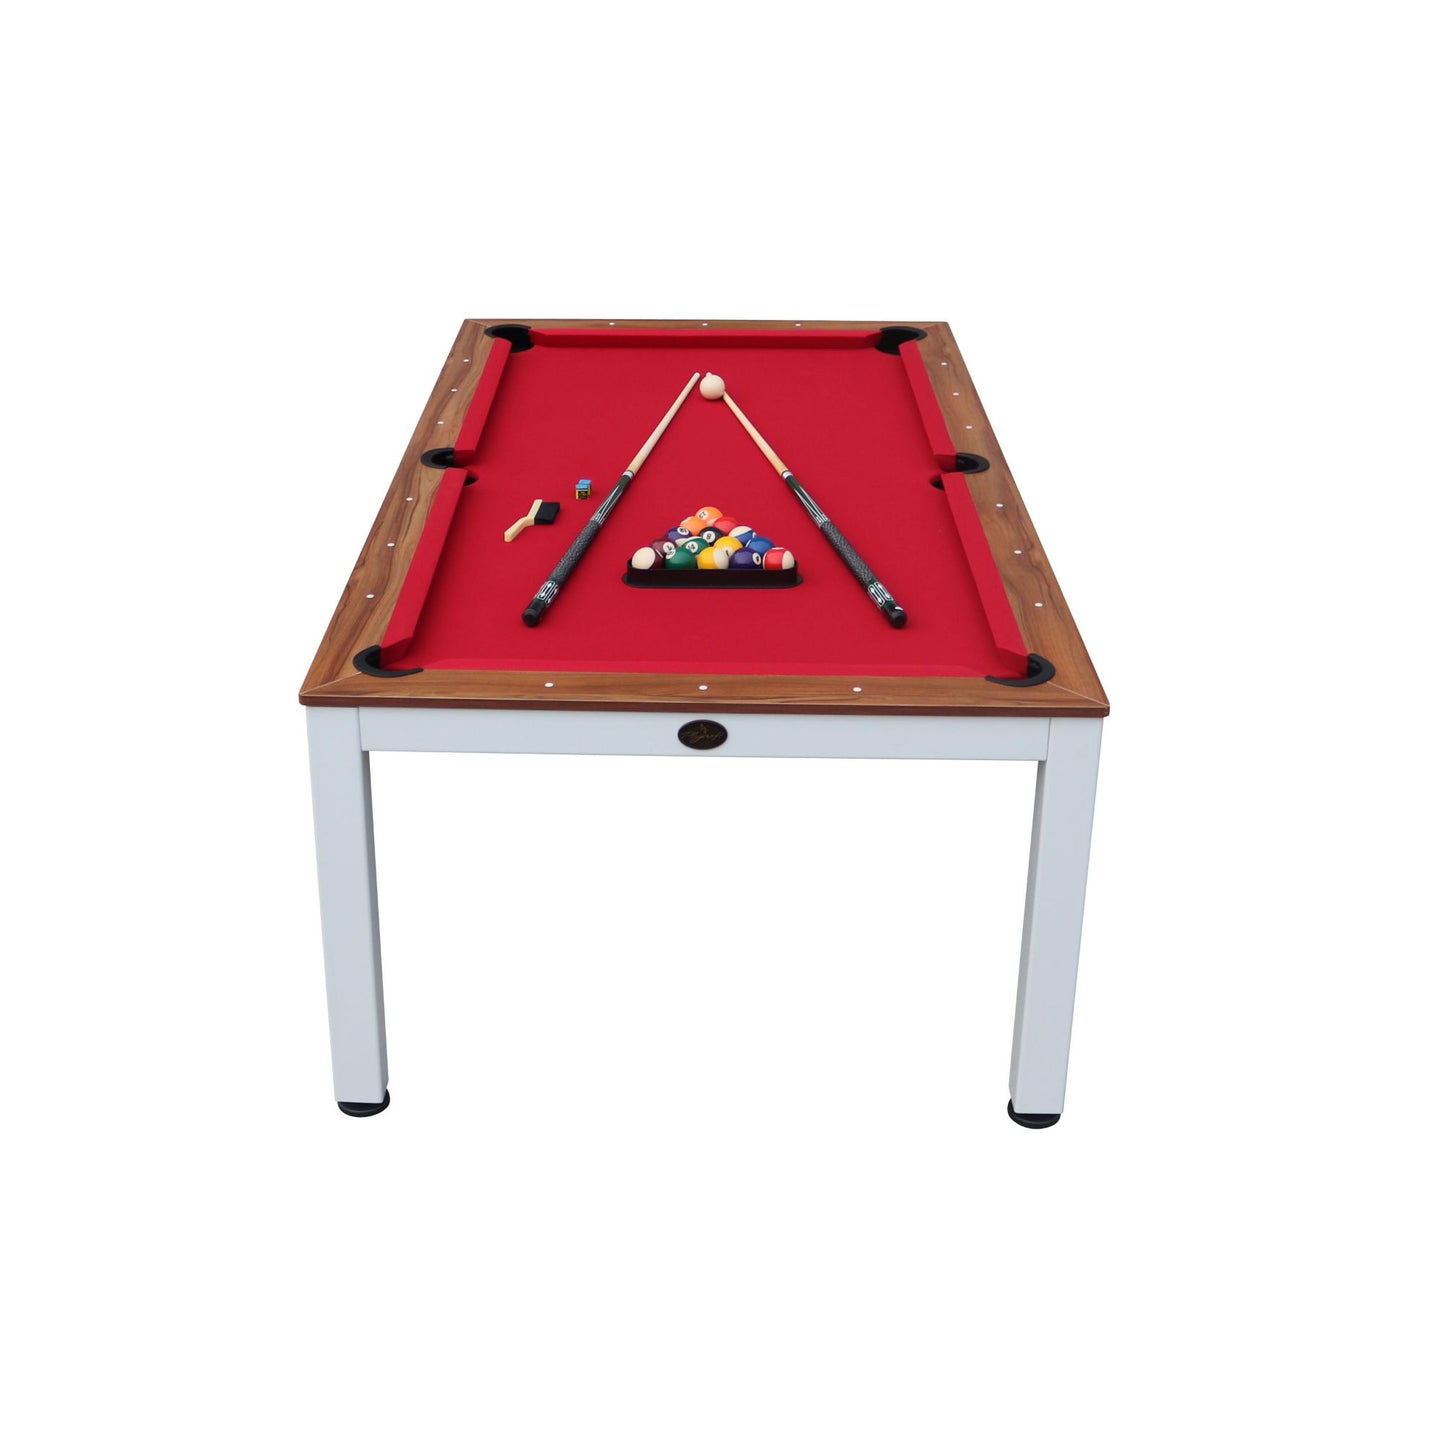 Playcraft Glacier 7' Pool Table with Dining Top - Gaming Blaze